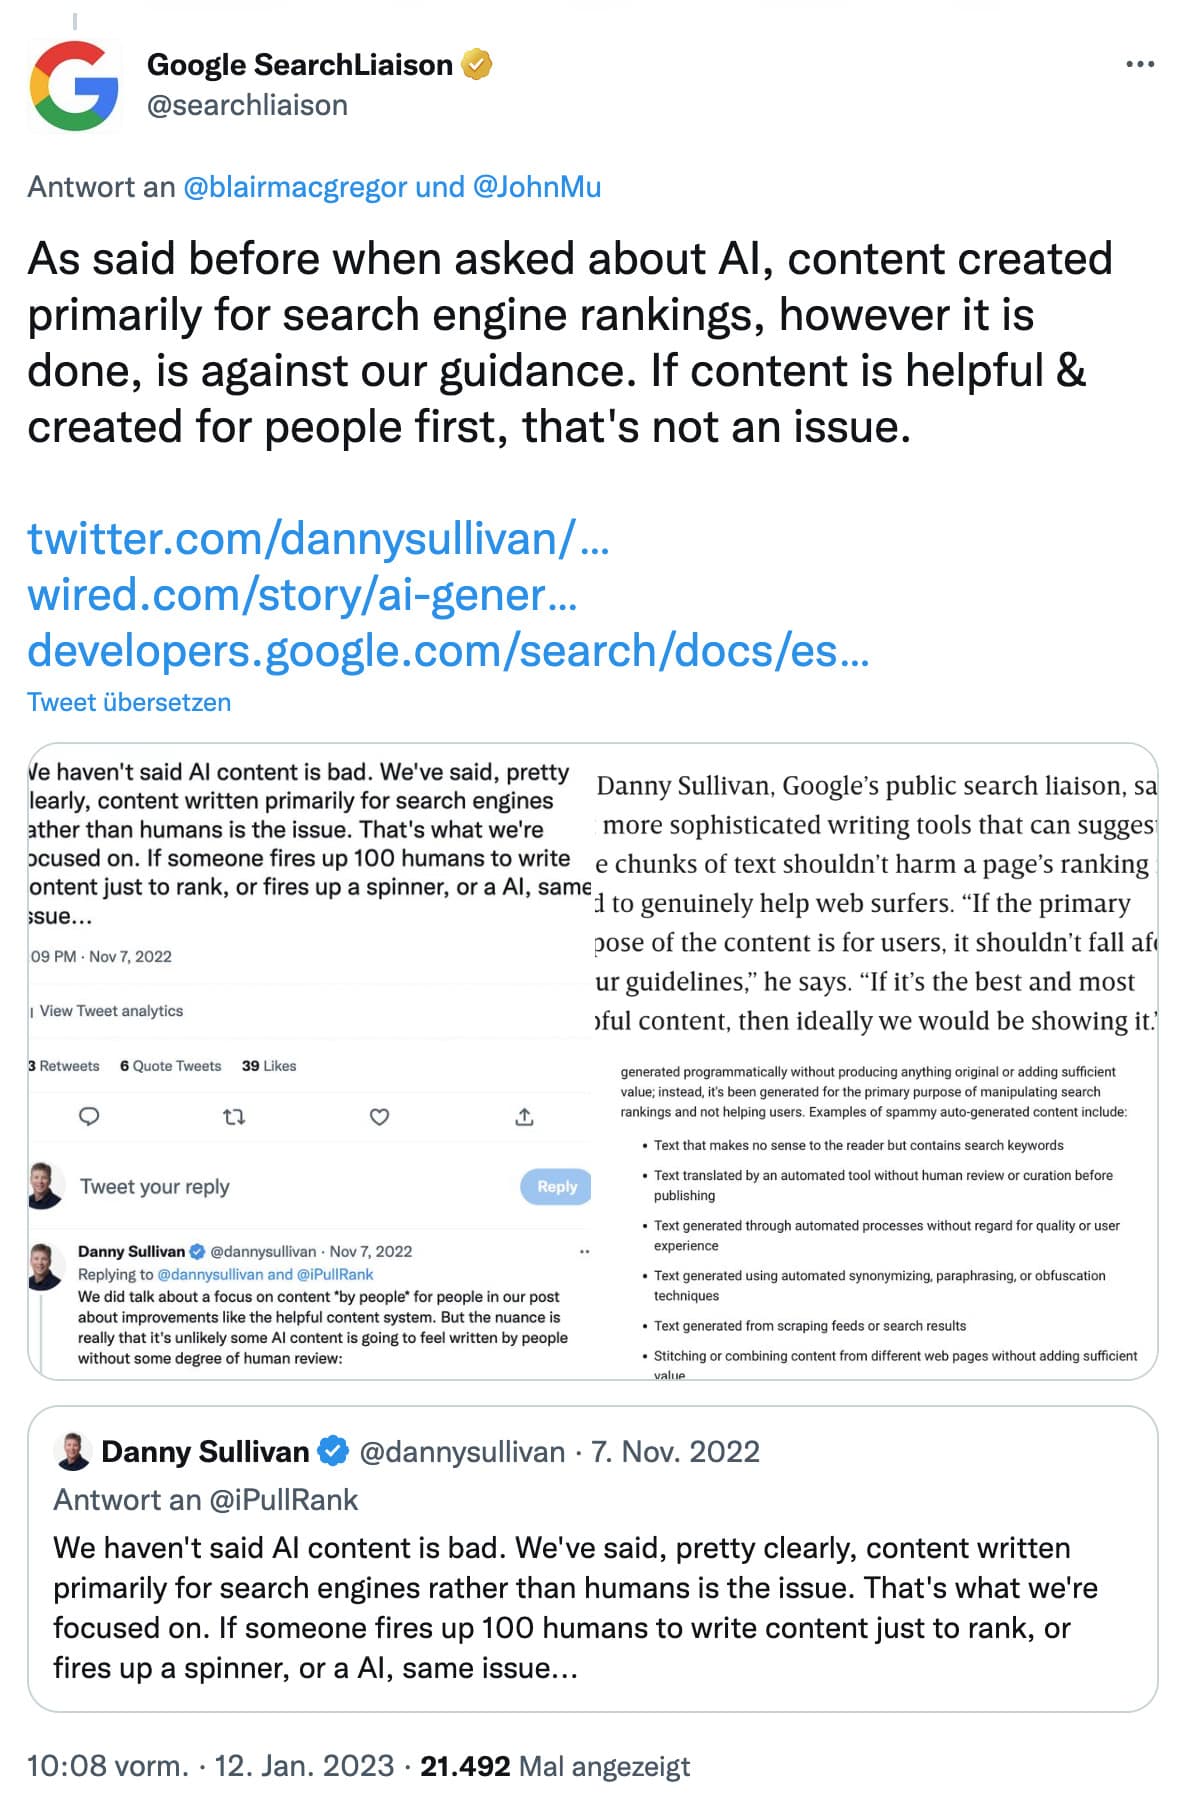 As said before when asked about Al, content created primarily for search engine rankings, however it is done, is against our guidance. If content is helpful & created for people first, that's not an issue.